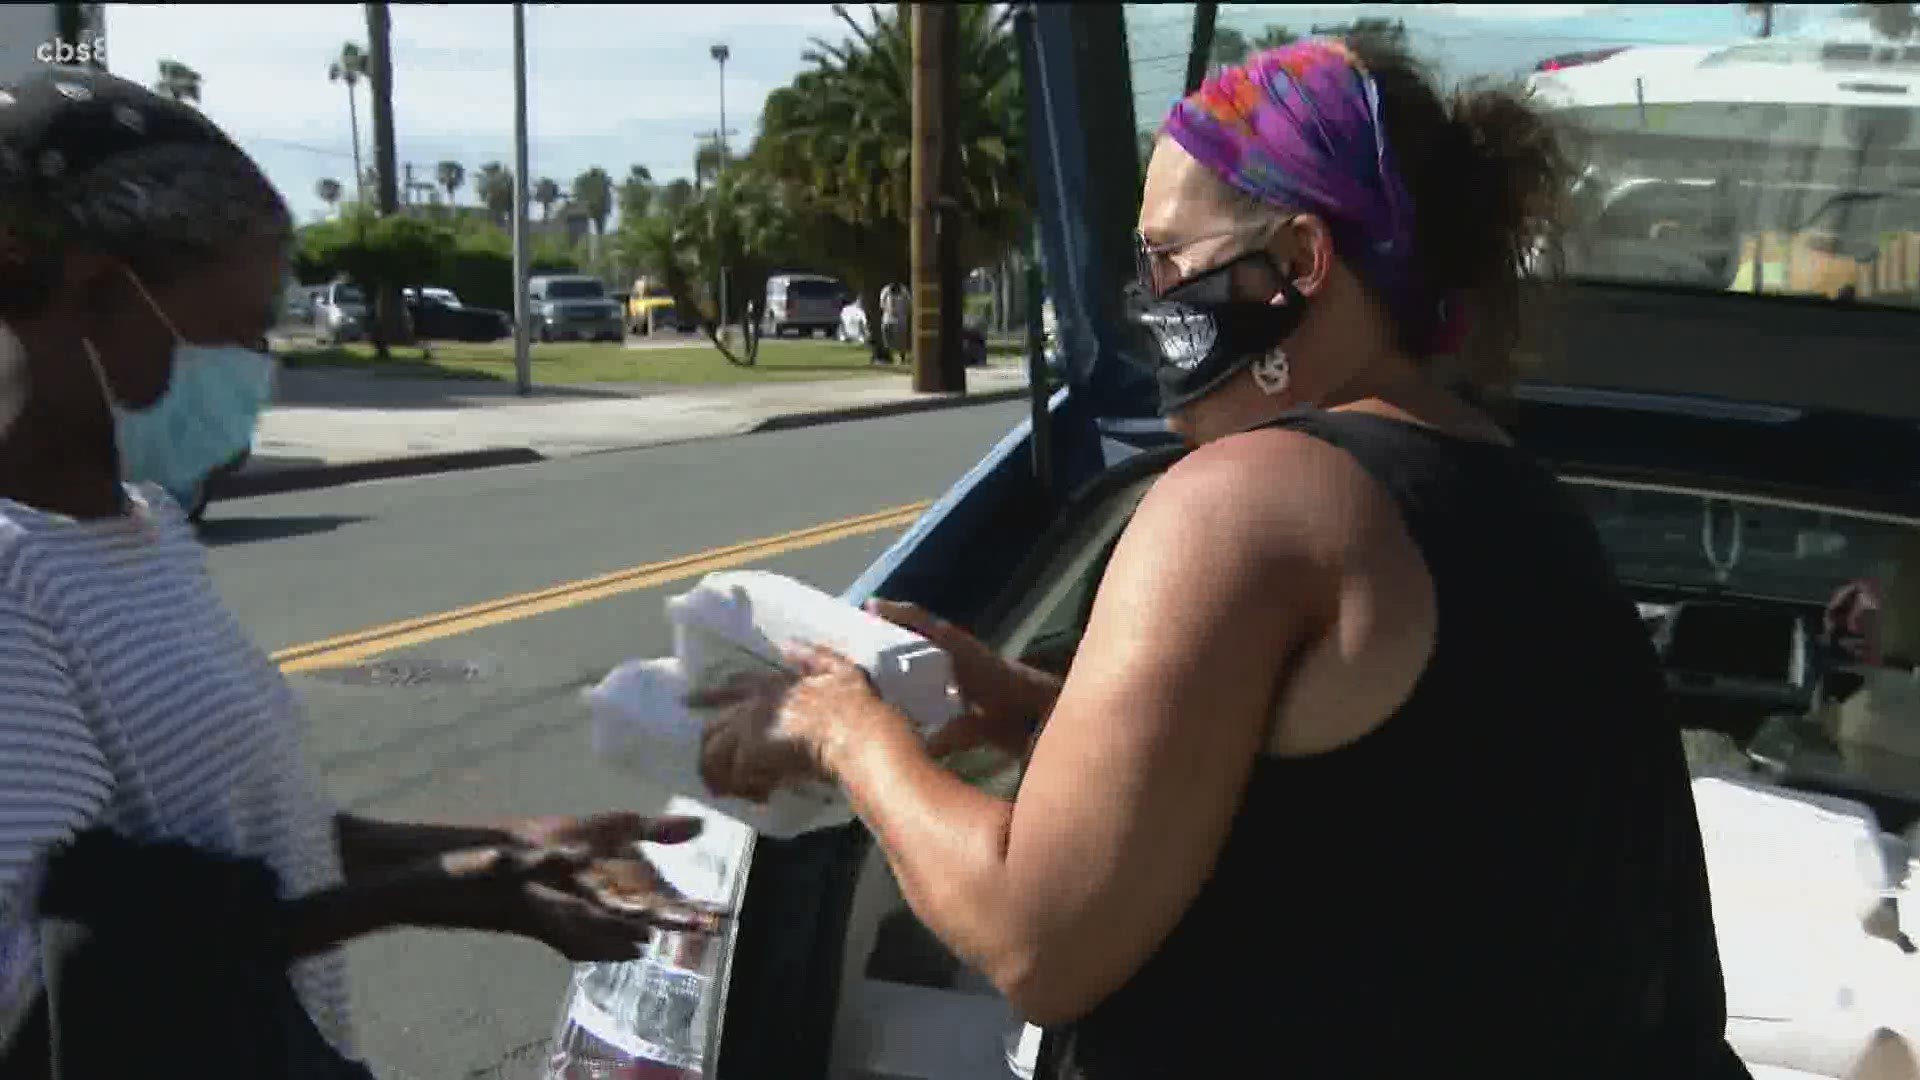 Vanessa Graziano created Oceanside Homeless Resource after being homeless herself.